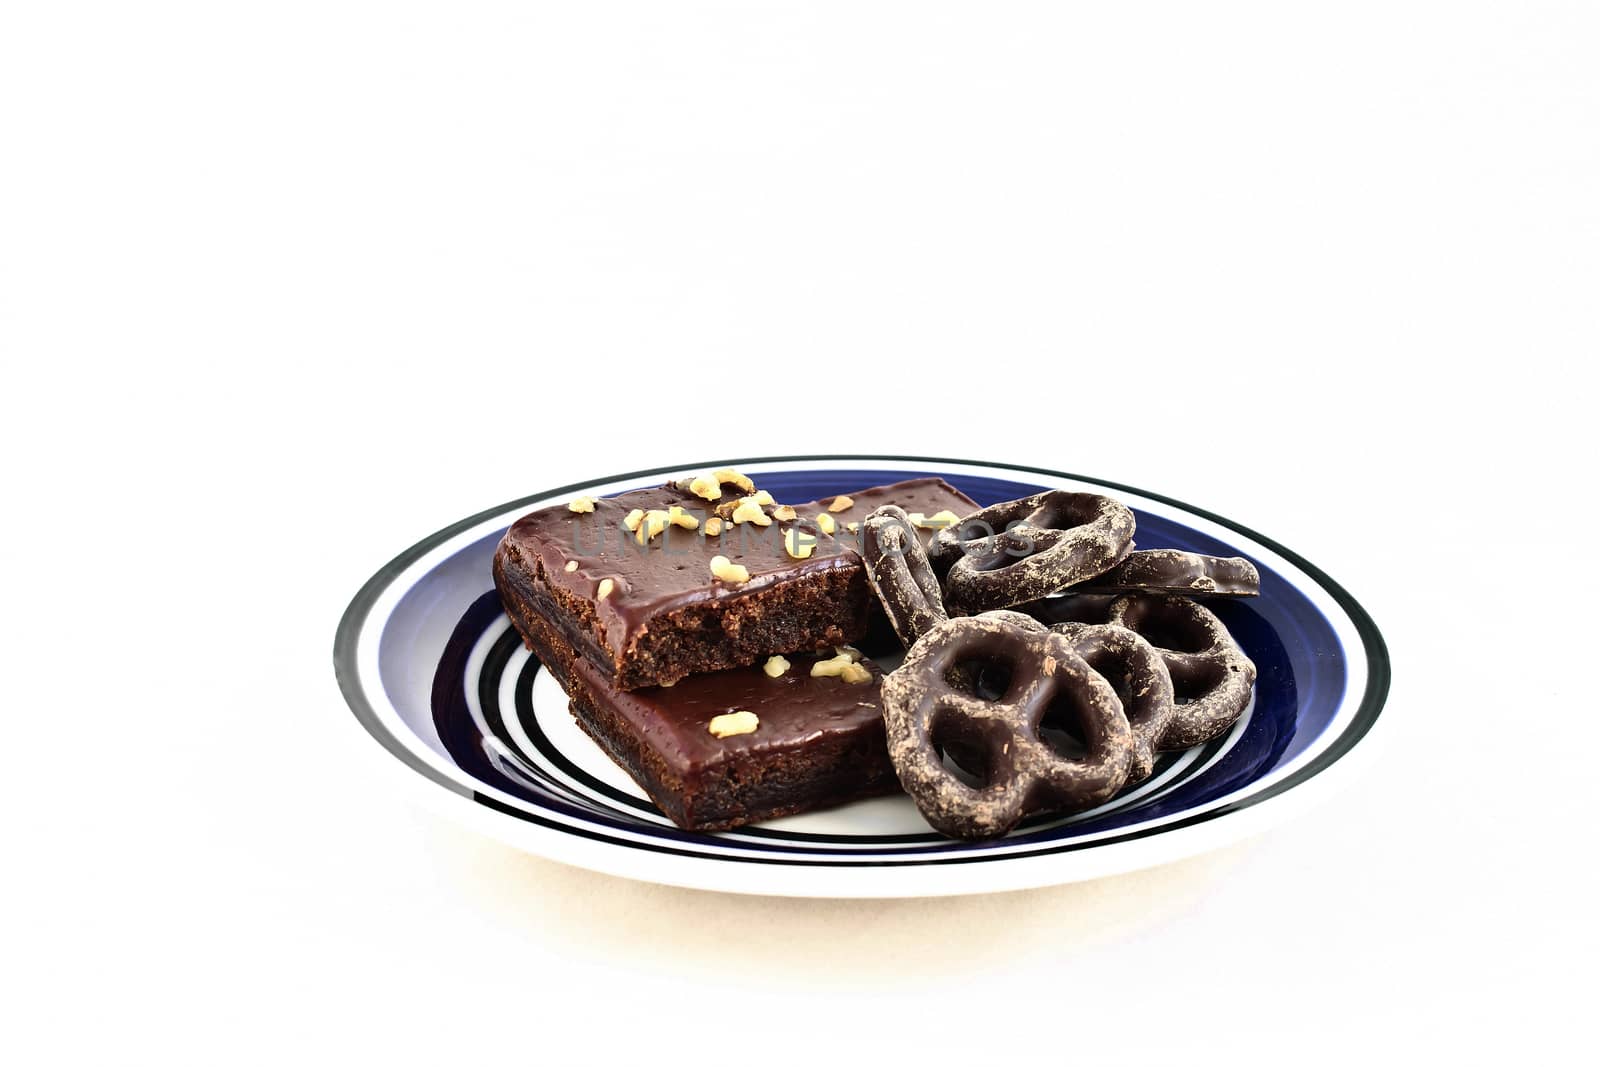 Chocolate covered pretzels and walnut-covered fudge brownie squares on a white and blue plate.